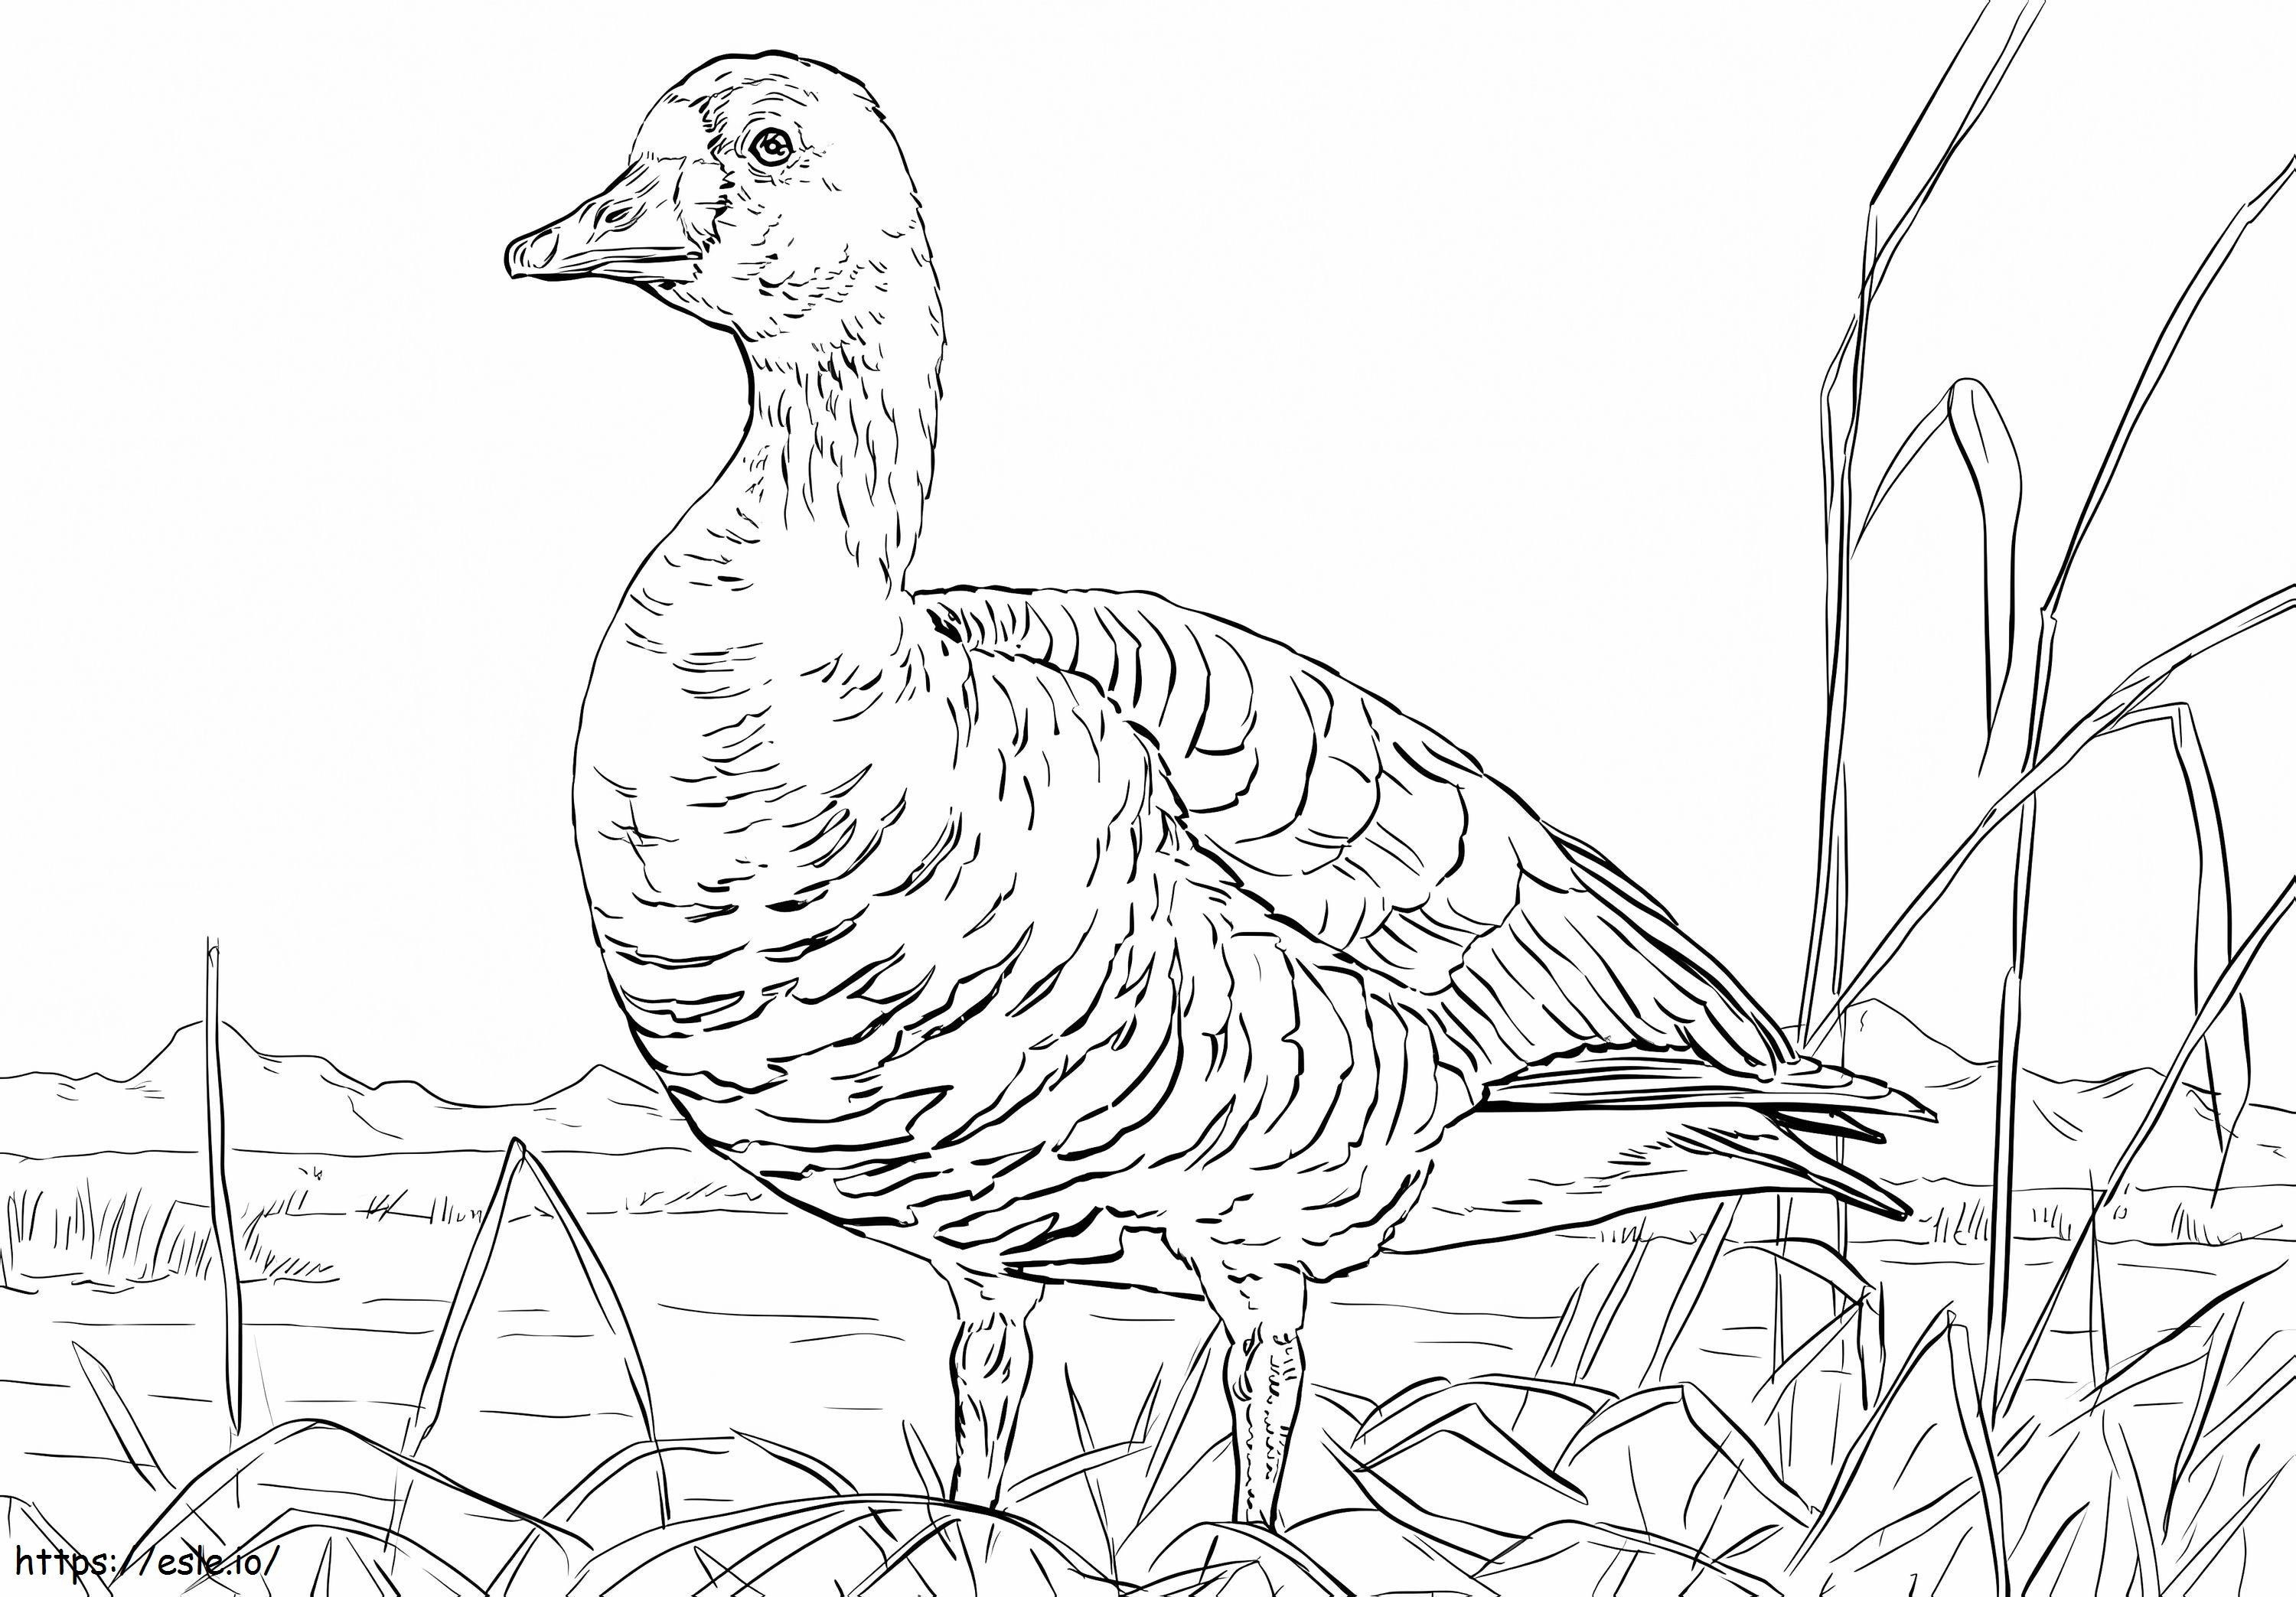 Greater White Goose coloring page